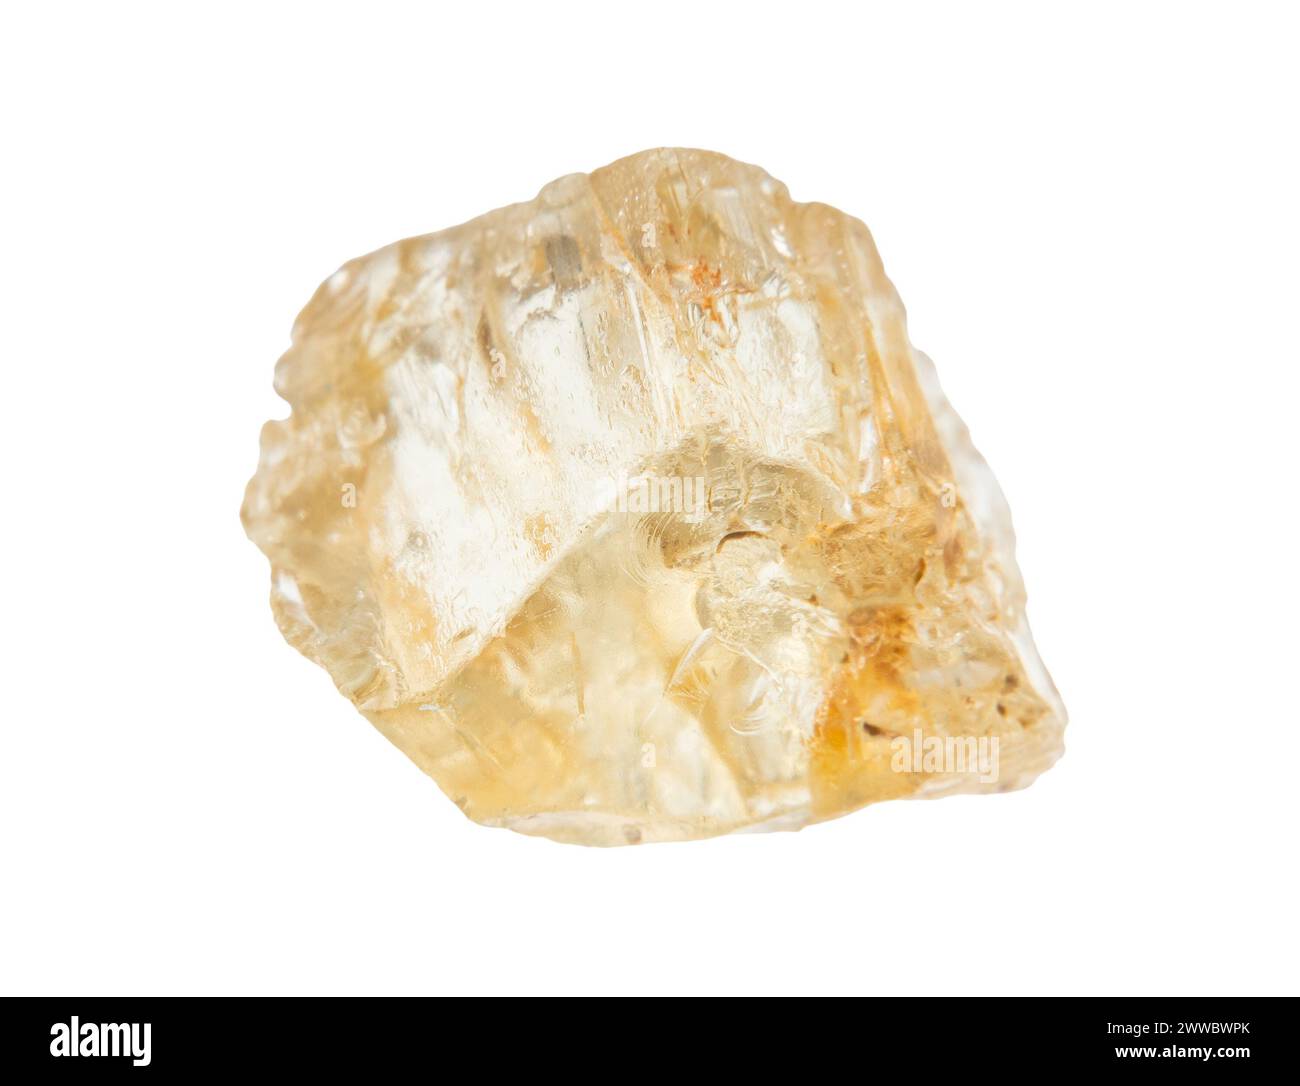 close up of sample of natural stone from geological collection - rough yellow scapolite crystal isolated on white background from Tajikistan Stock Photo